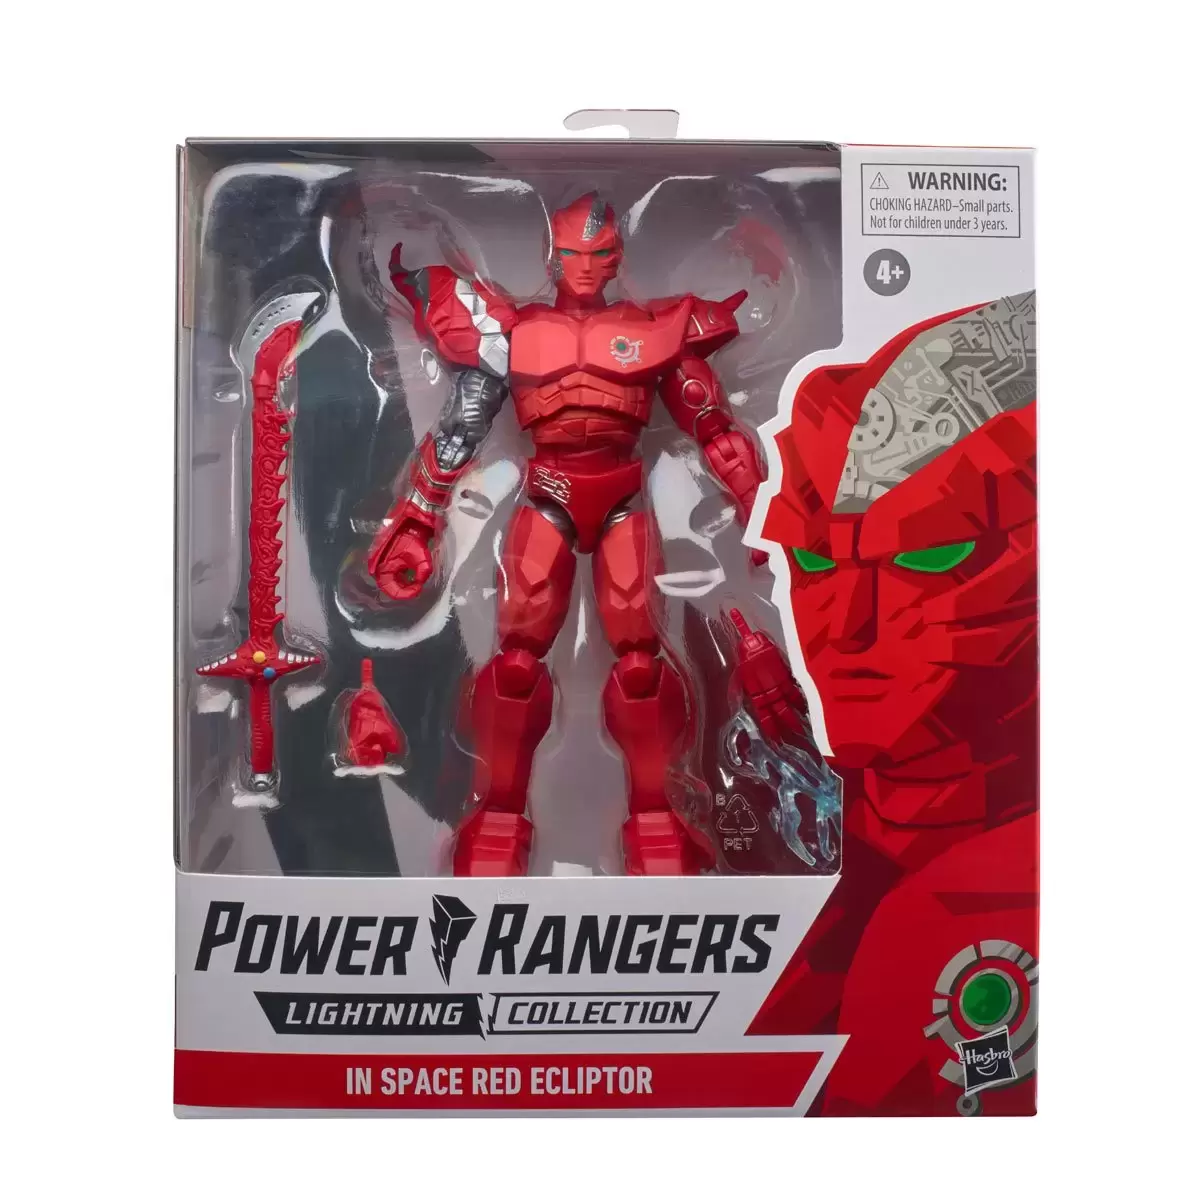 Power Rangers Hasbro - Lightning Collection - In Space Red Ecliptor